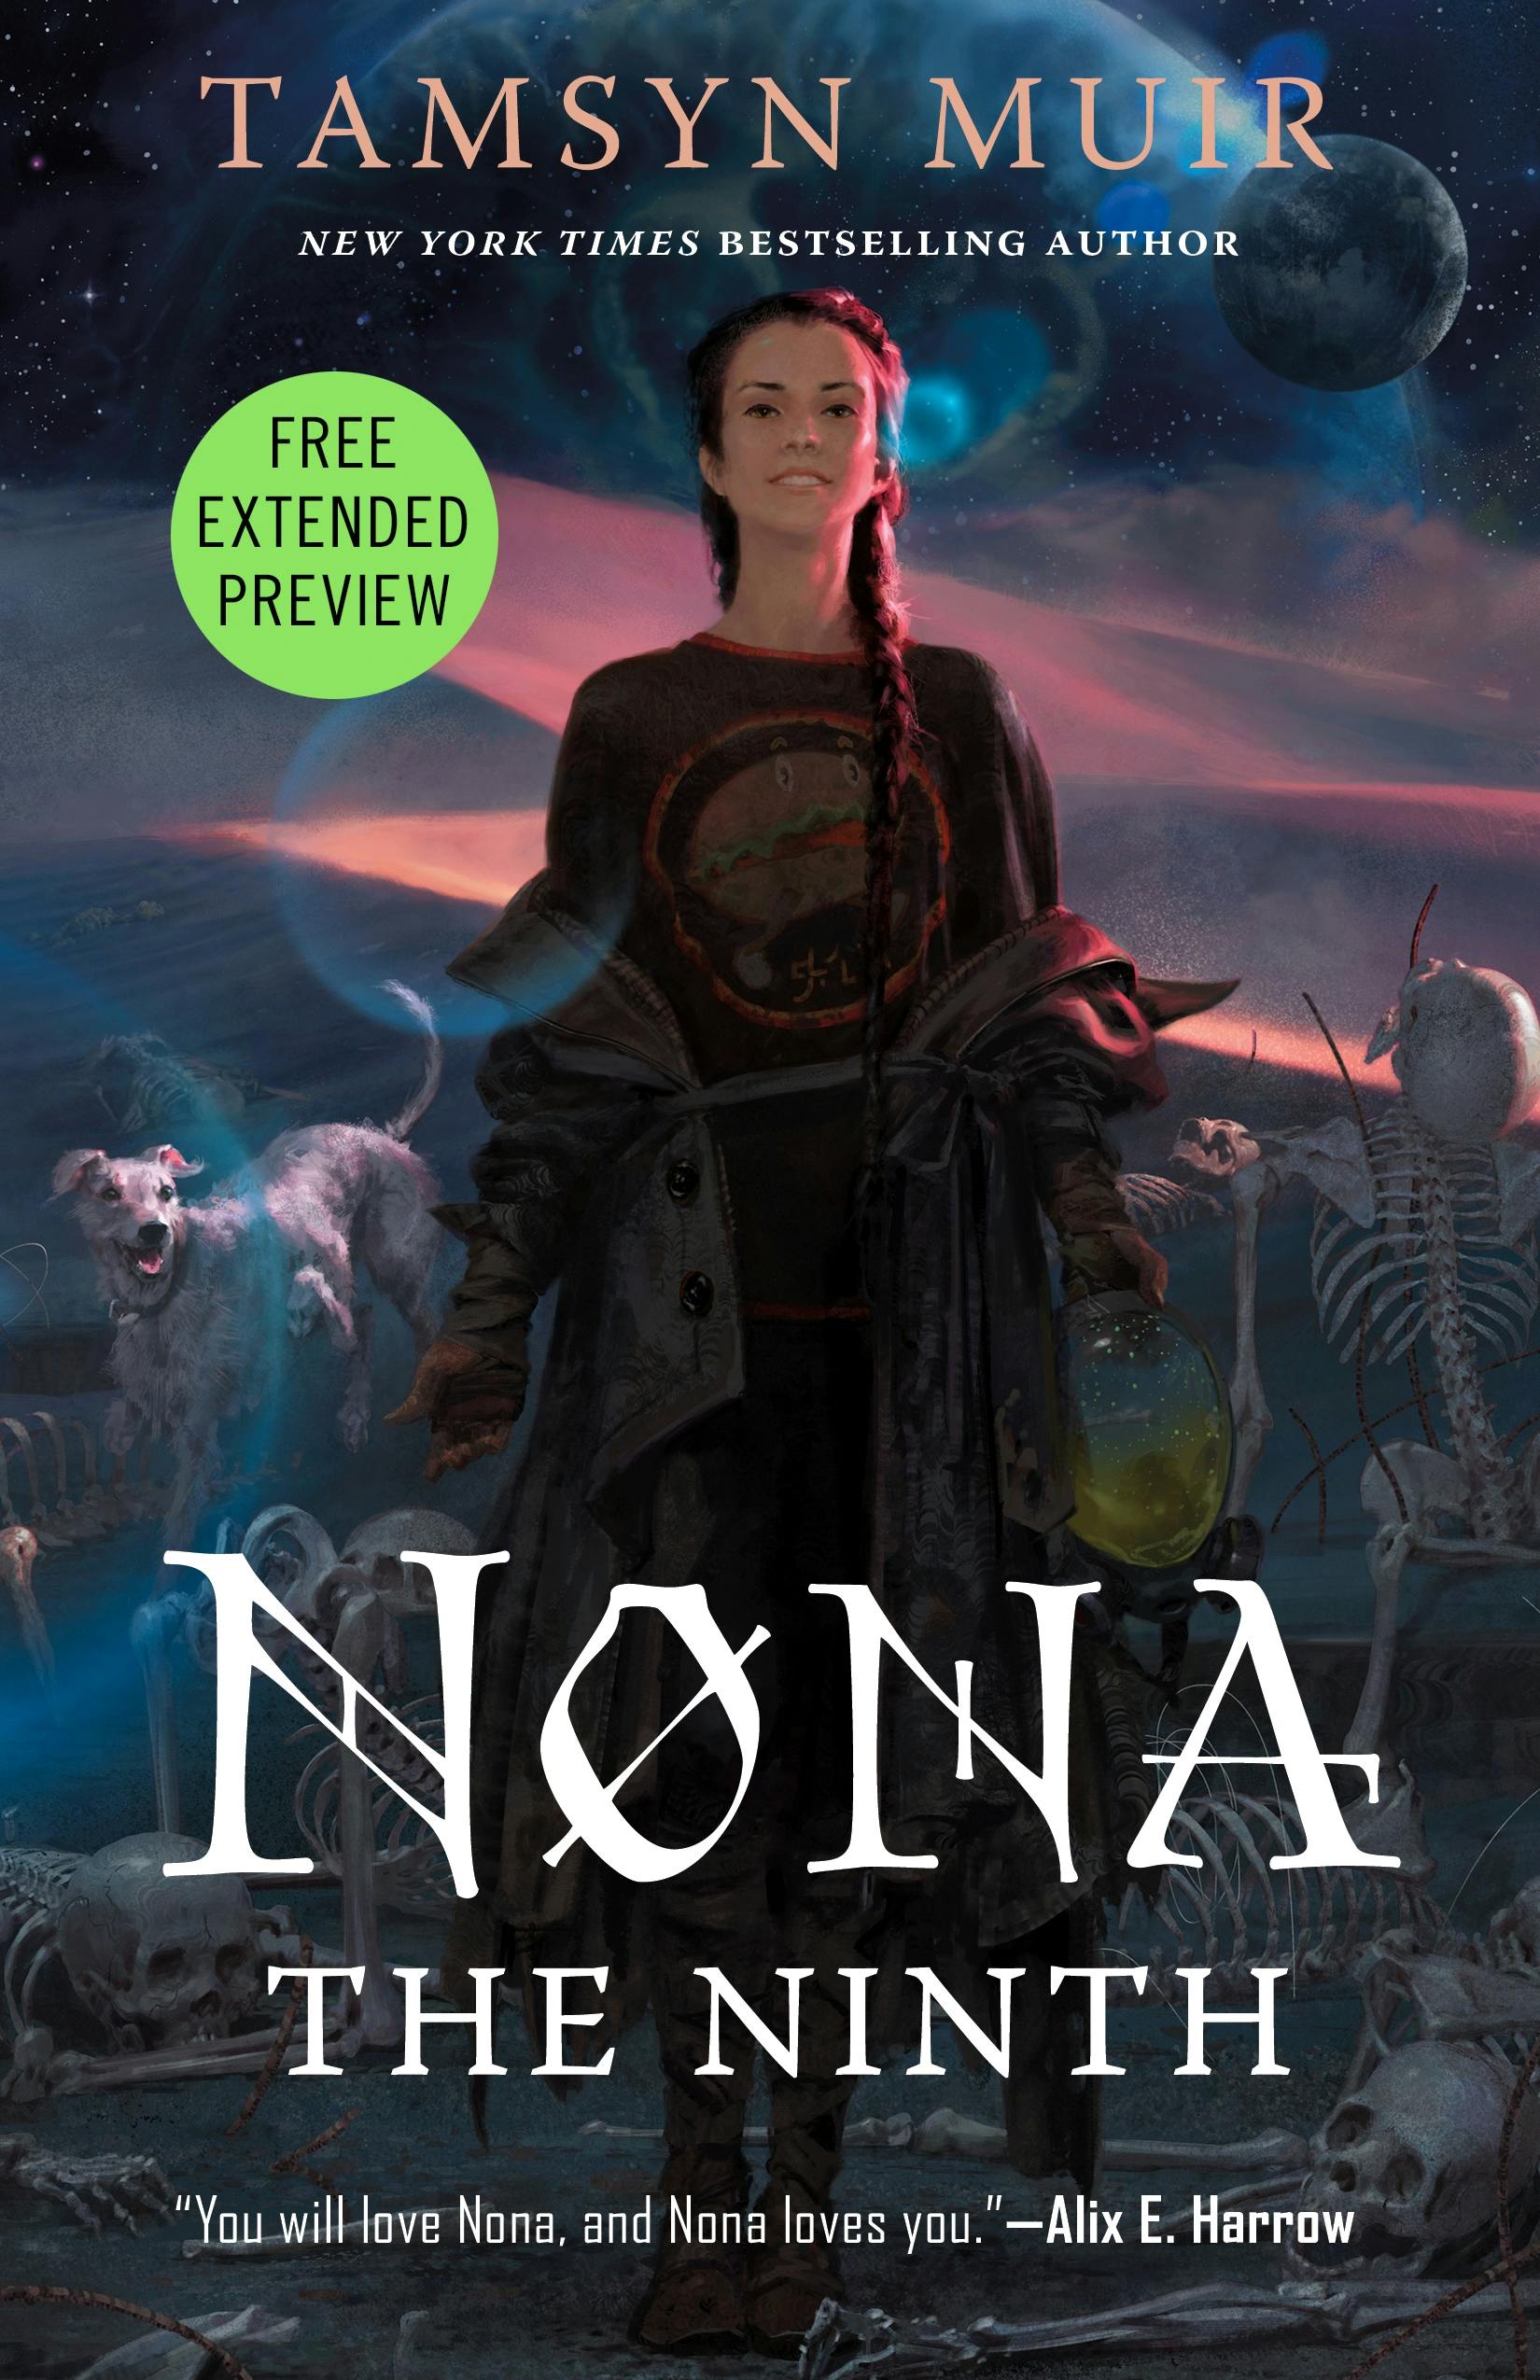 Cover for the book titled as: Nona the Ninth Sneak Peek